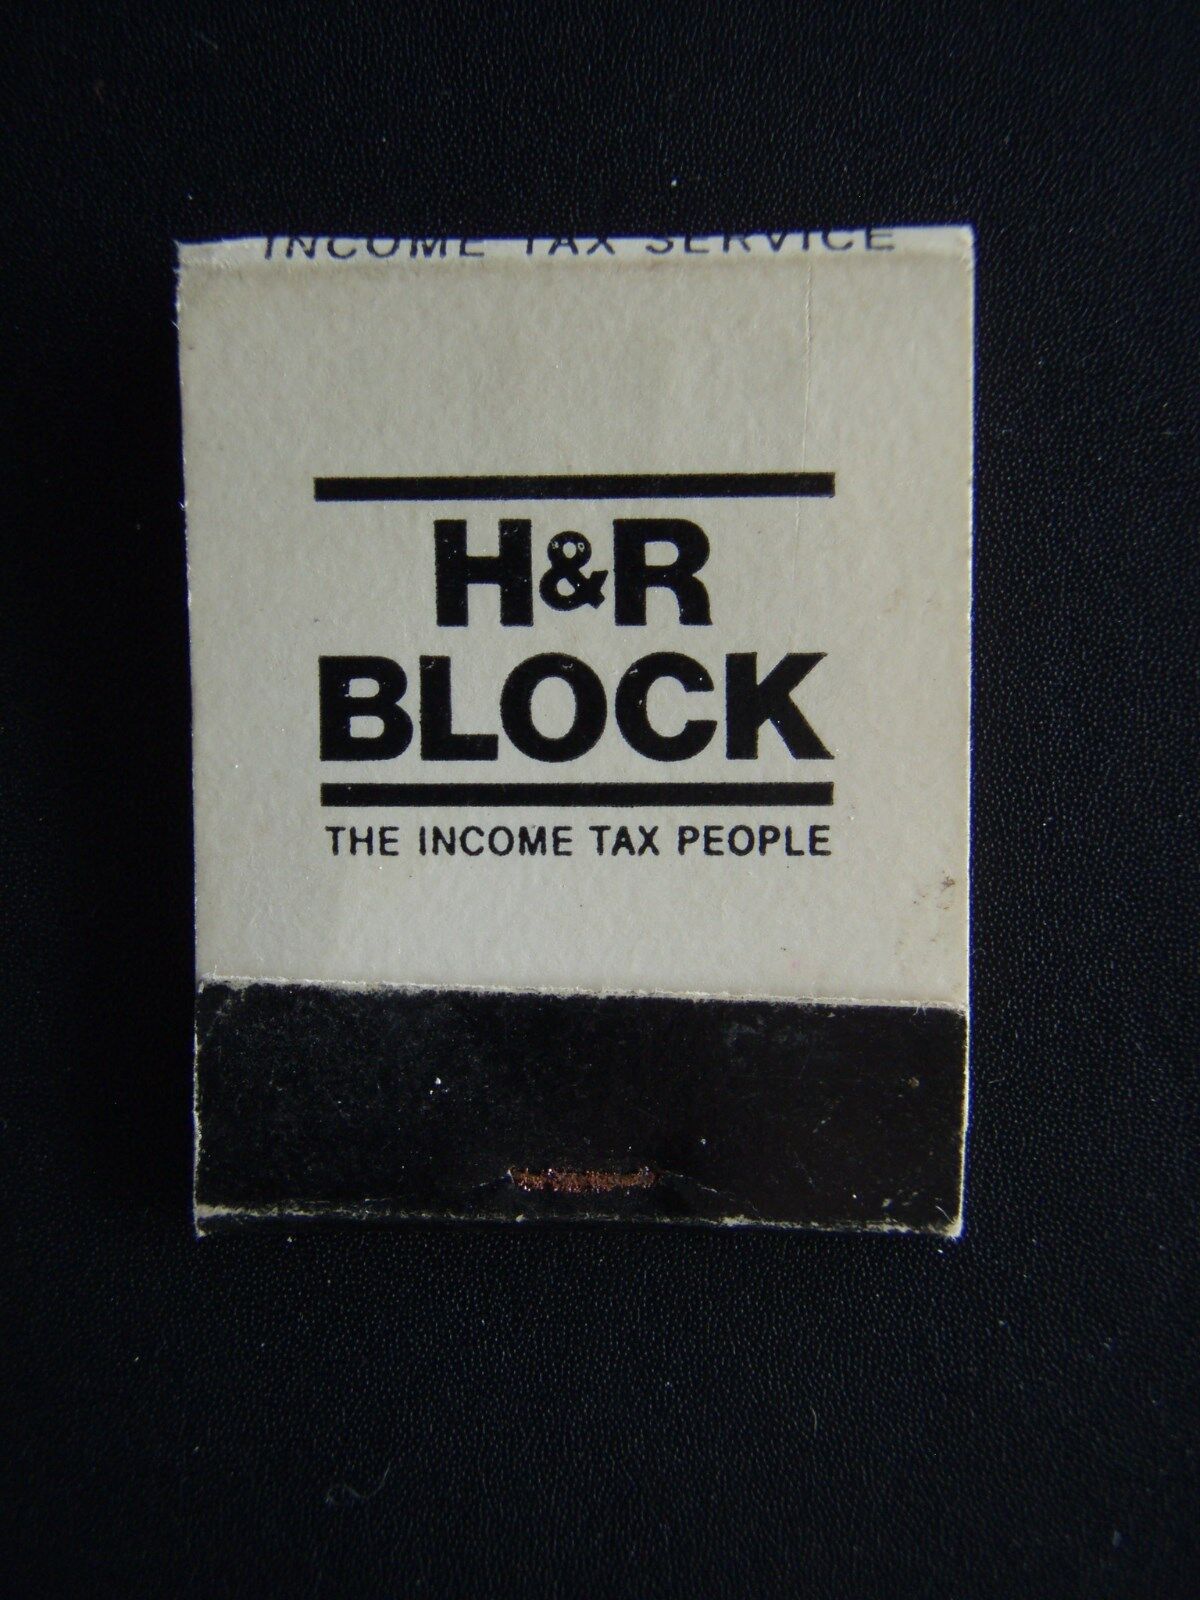 H&R BLOCK THE INCOME TAX PEOPLE CONFIDENTIAL SERVICE BLACK MATCHBOOK